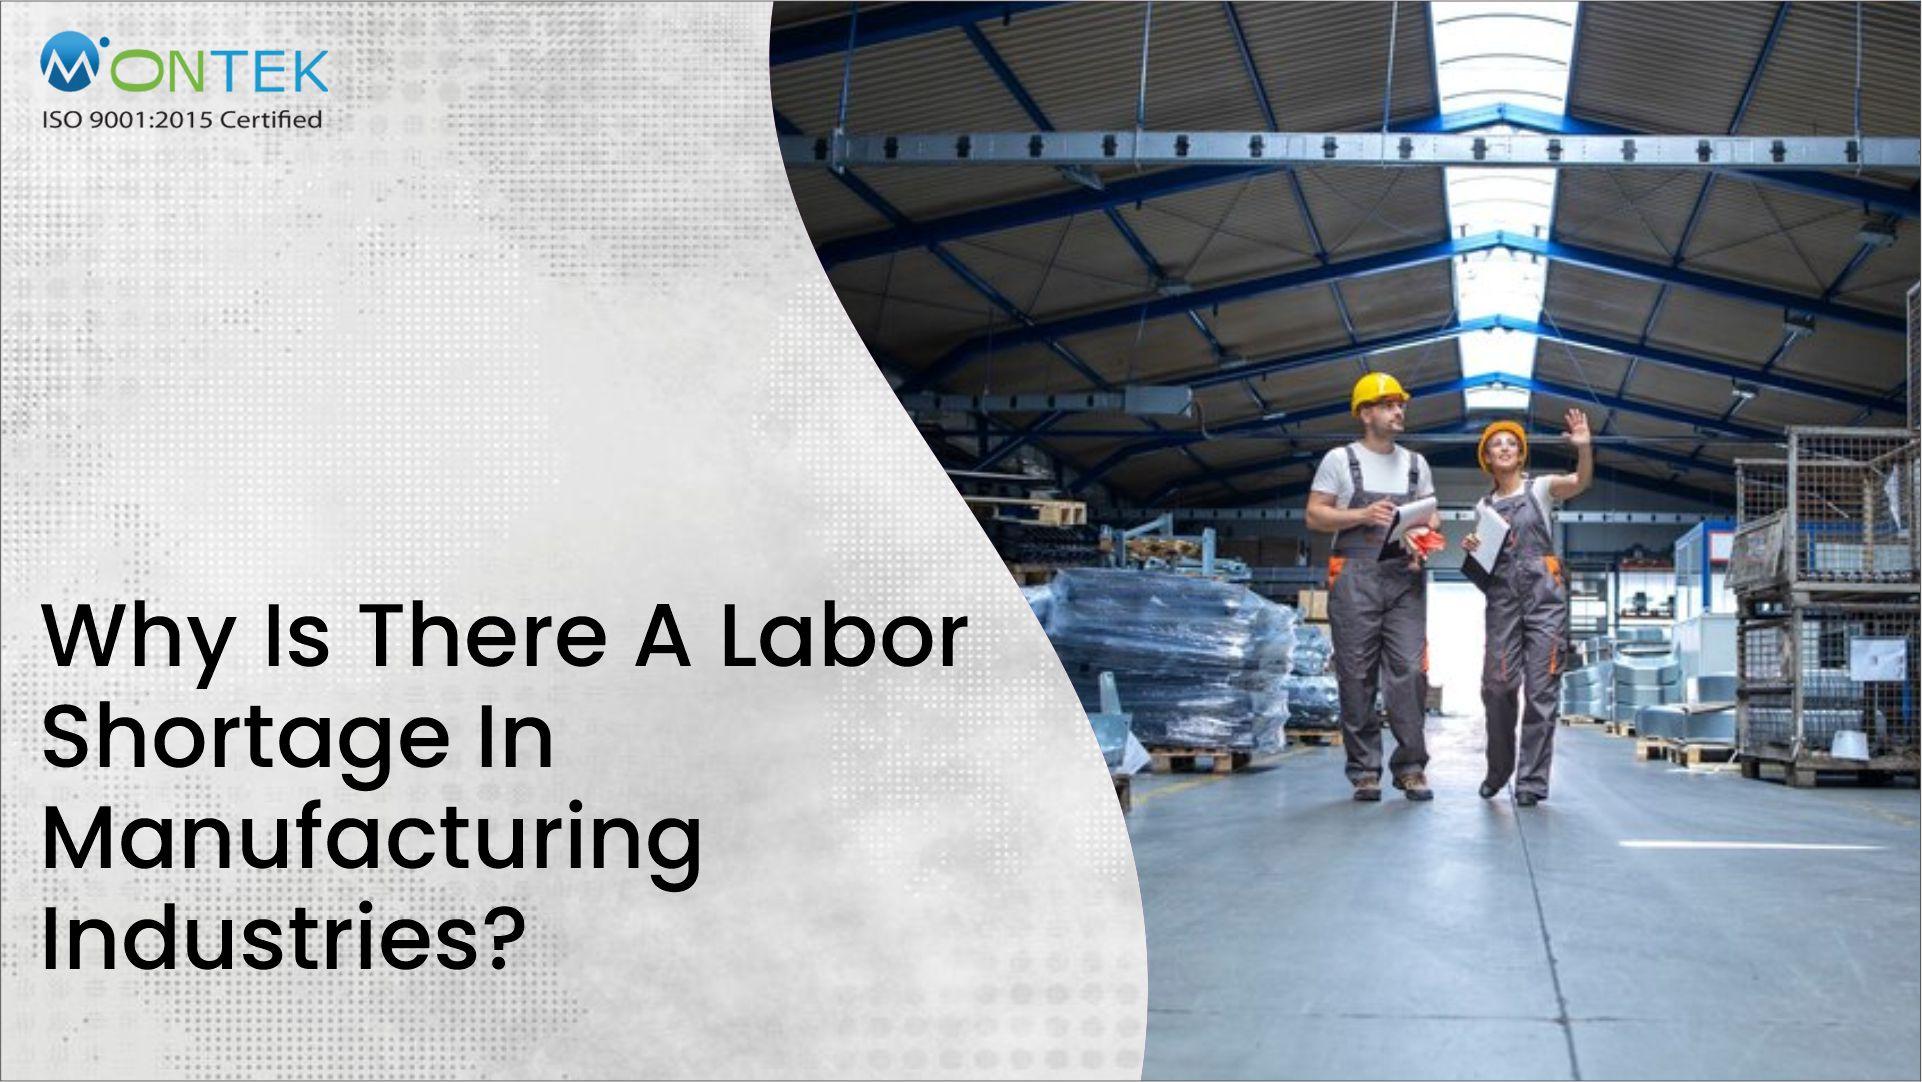 Why is there a labor shortage in manufacturing industries